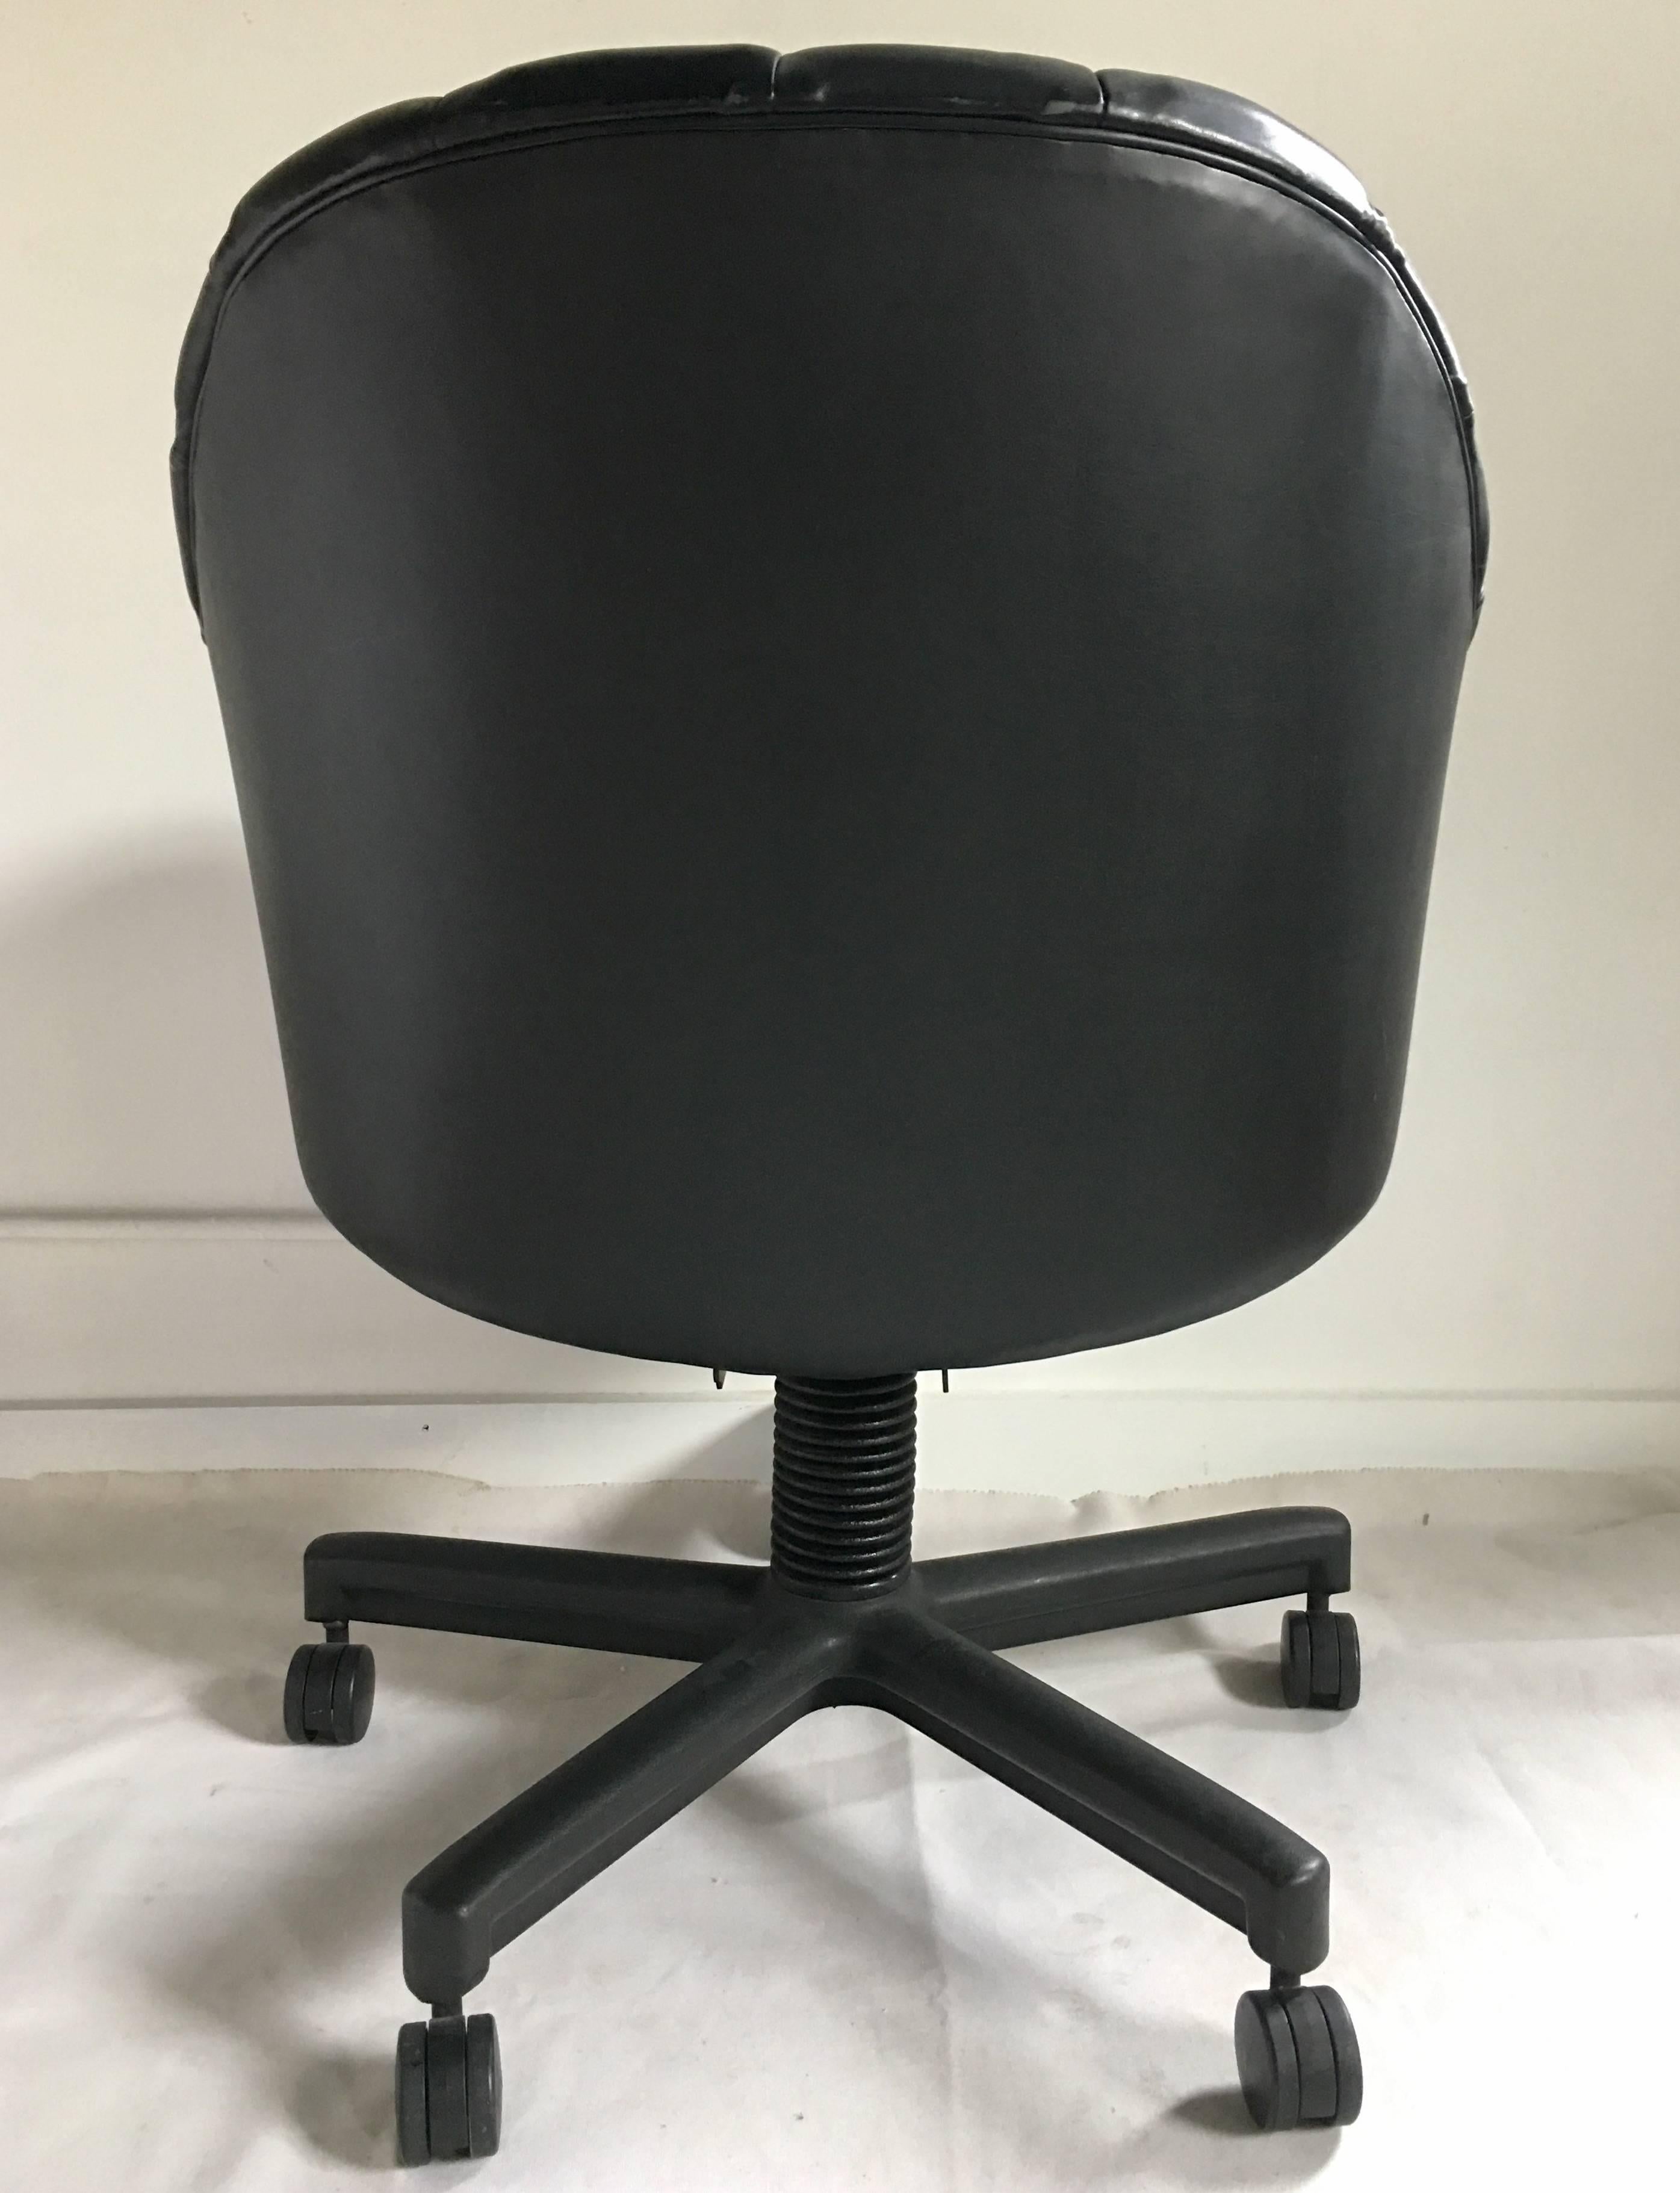 Hollywood Regency style black leather rolling office or desk chair by Jack Cartwright. This modern sculptural design features a curved channeled fan back and five legs with casters. Chair tilt can be adjusted by a twist control located underneath